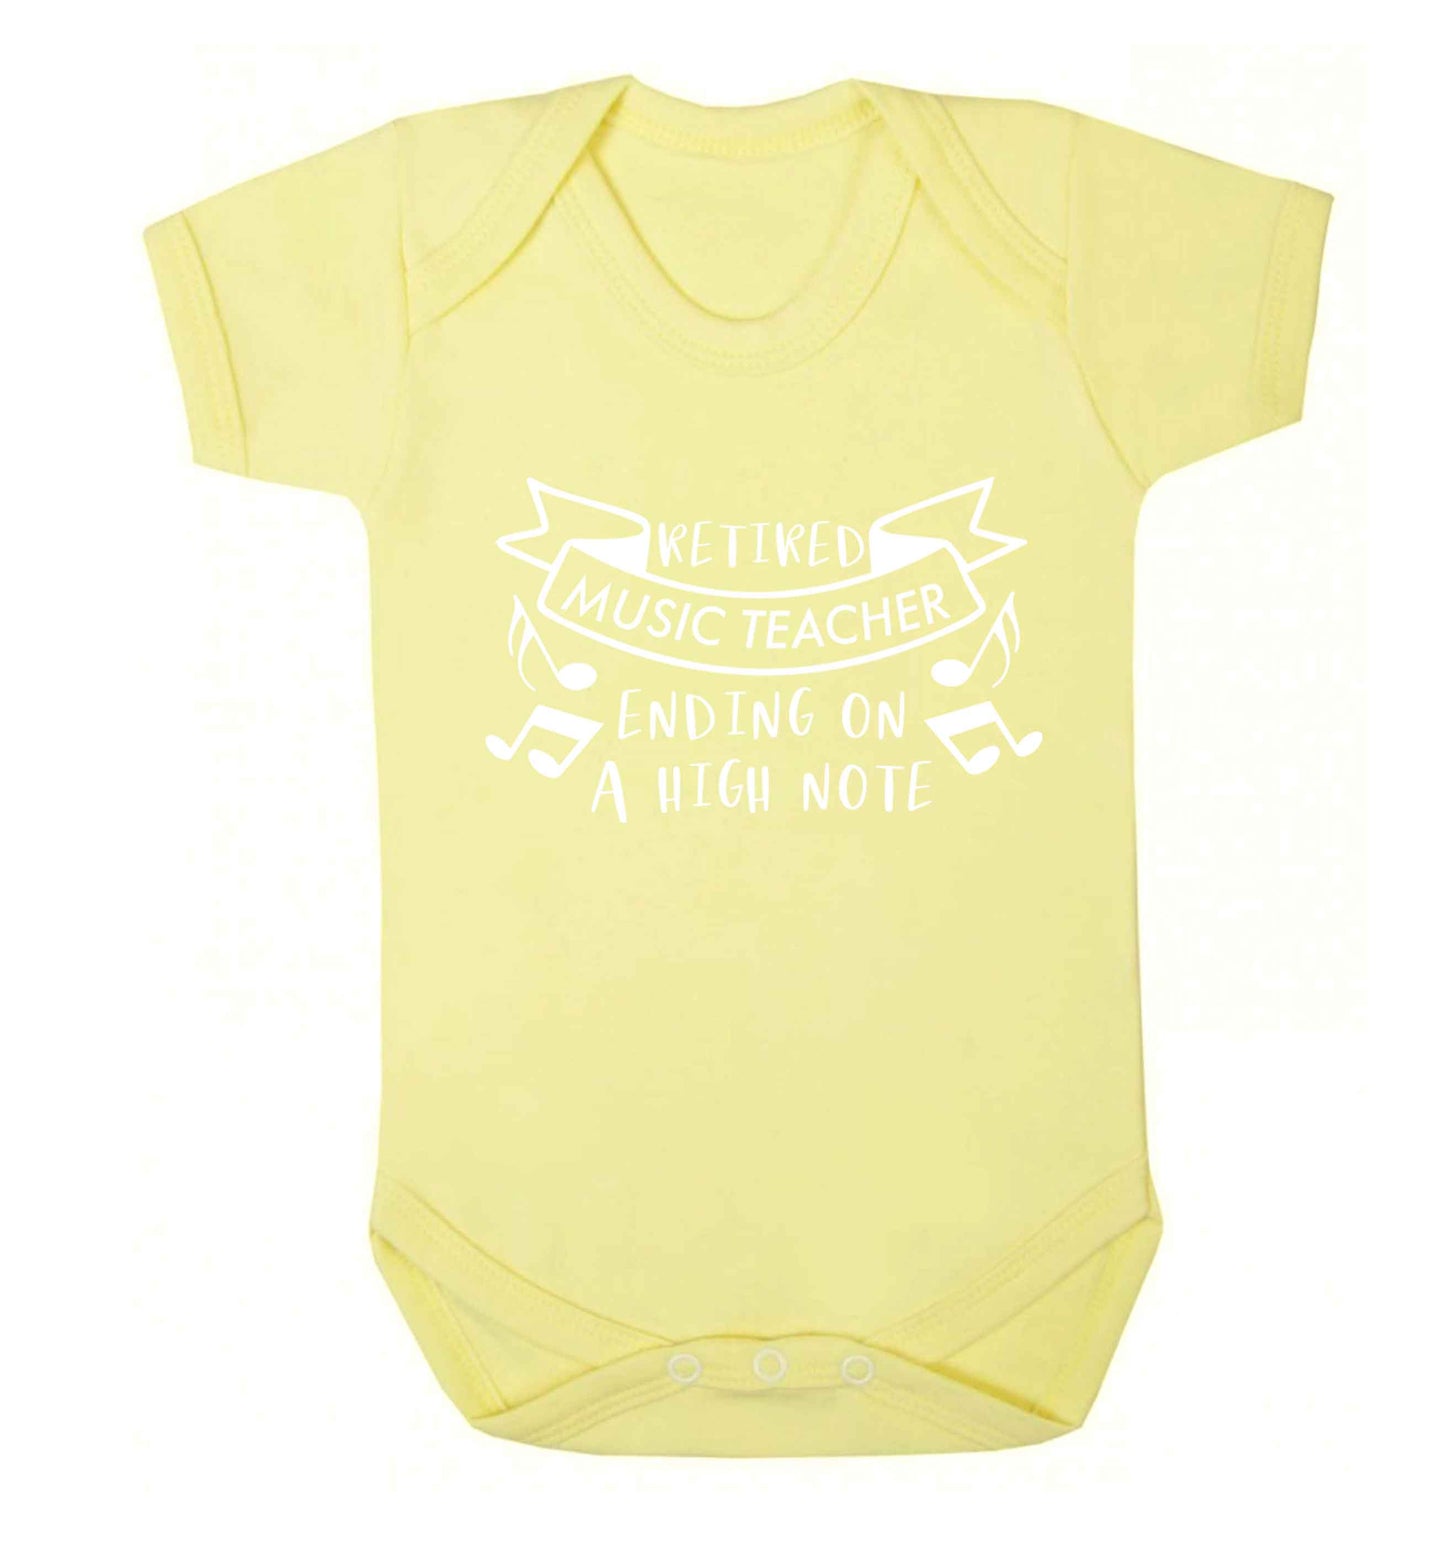 Retired music teacher ending on a high note Baby Vest pale yellow 18-24 months